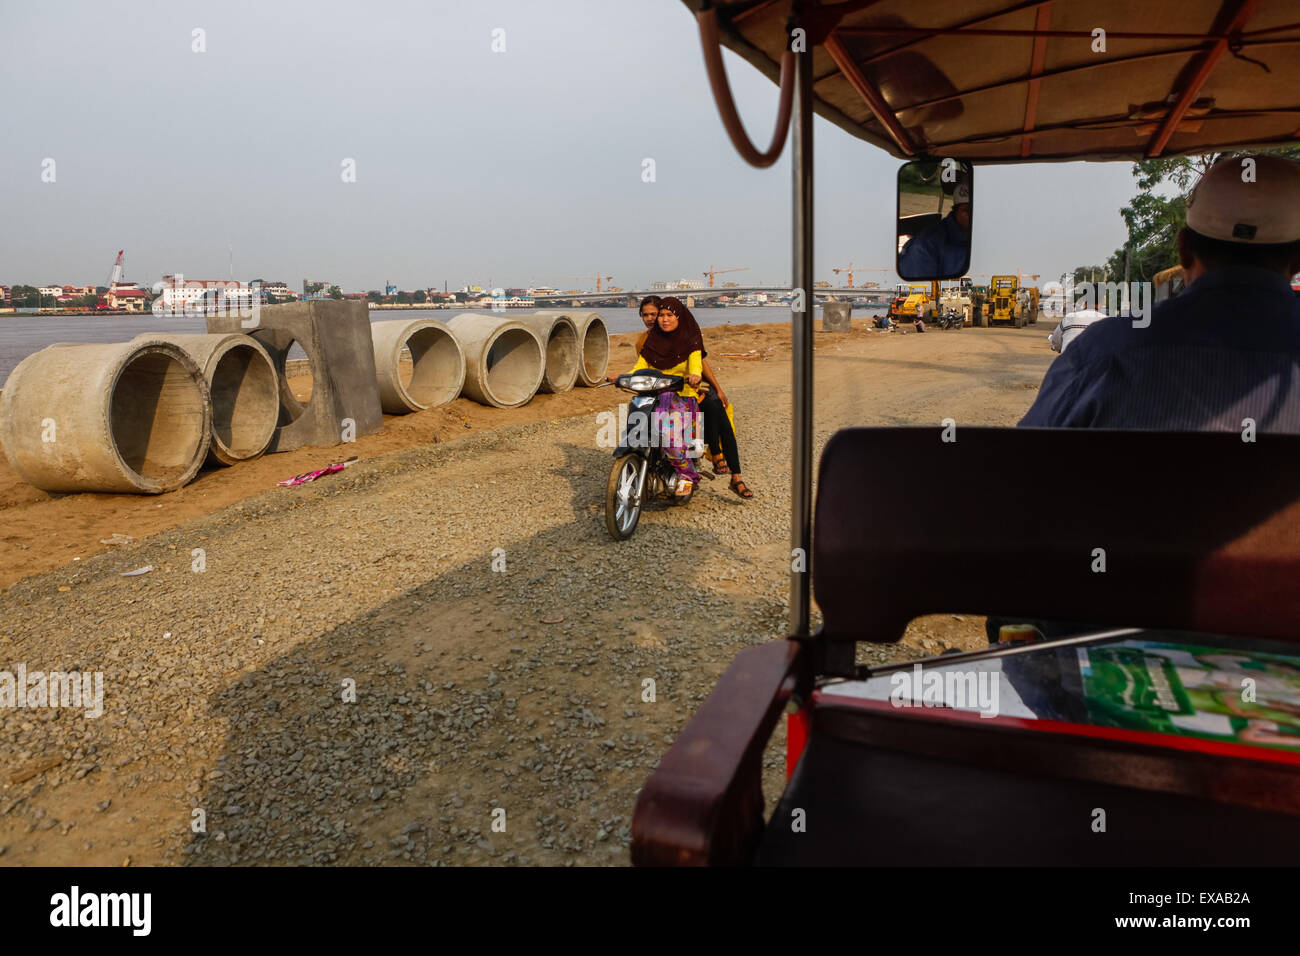 Motorists and tuk-tuk passing through an unfinished road construction project on the side of Tonle Sap river in Phnom Penh, Cambodia. Stock Photo